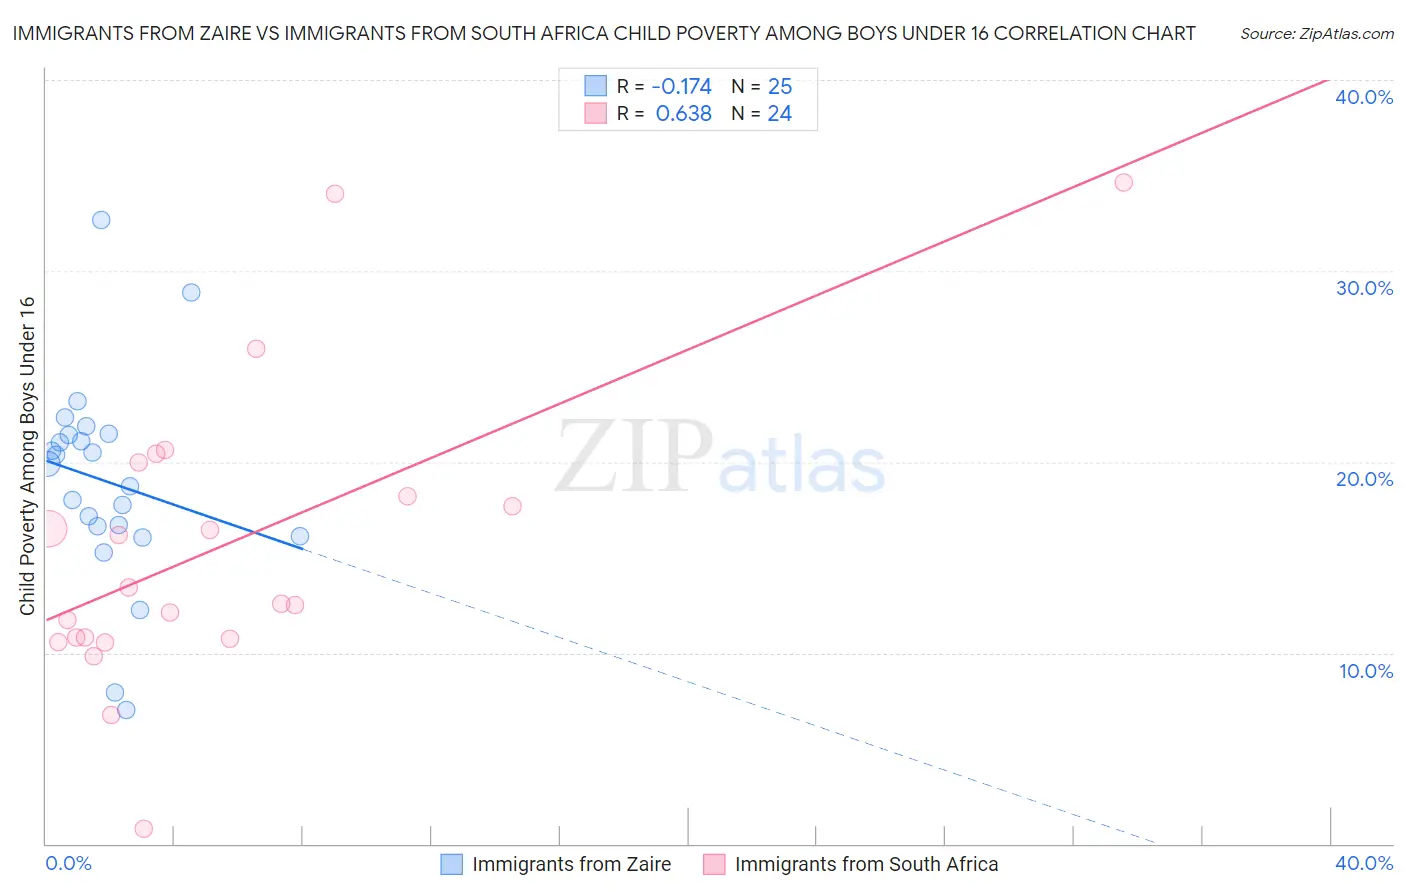 Immigrants from Zaire vs Immigrants from South Africa Child Poverty Among Boys Under 16